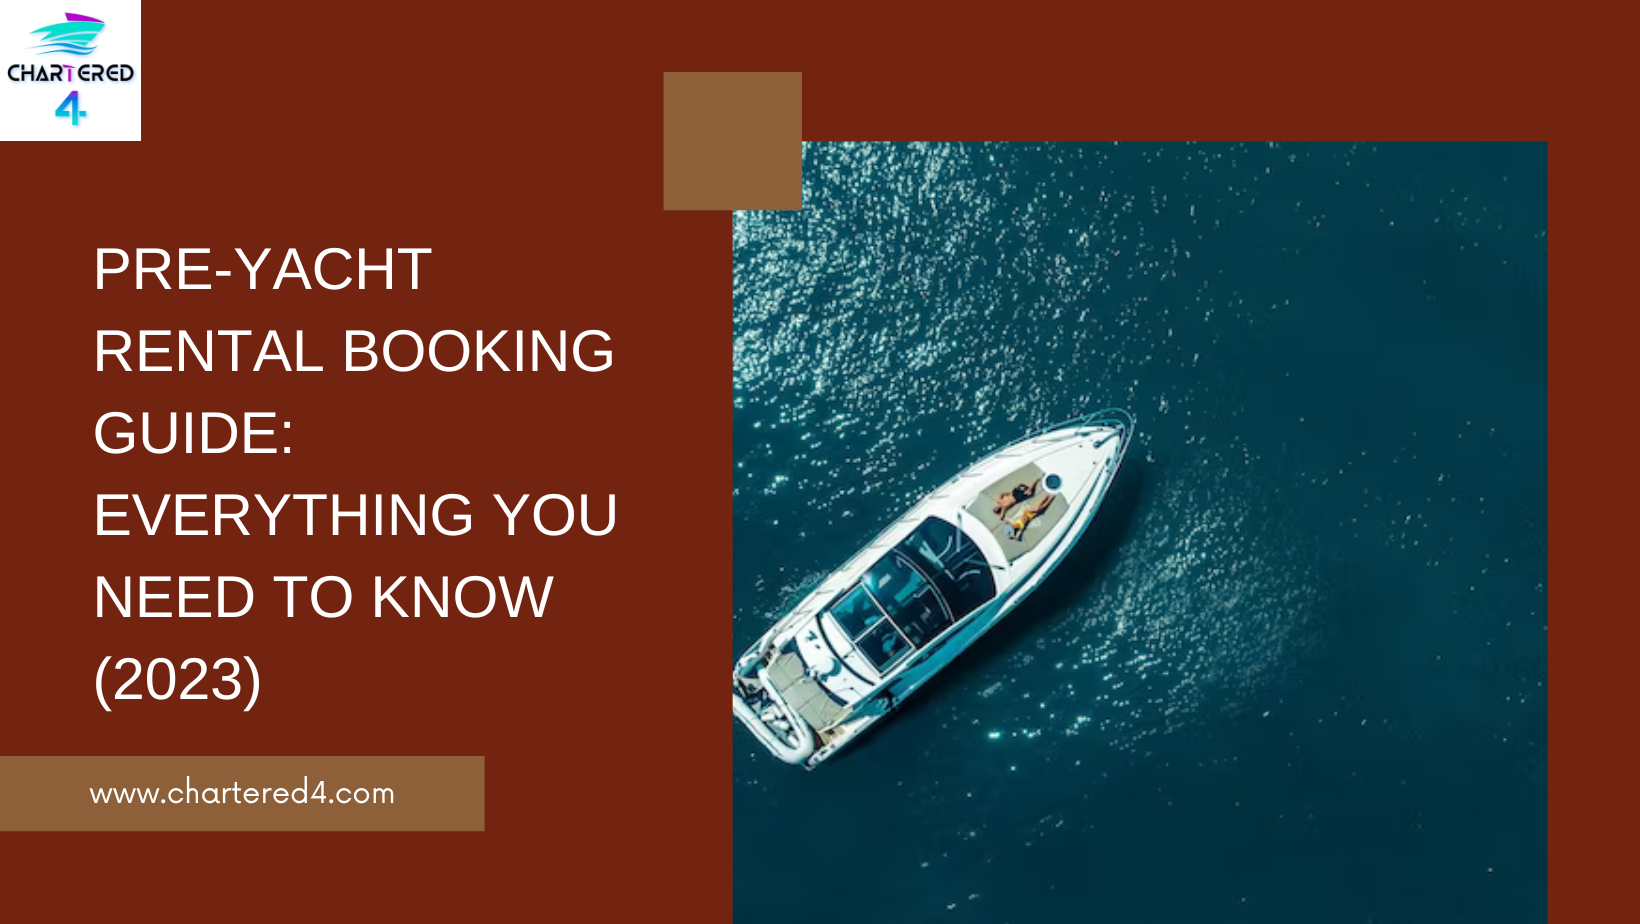 Pre-Yacht Rental Booking Guide: Everything You Need to Know (2023)